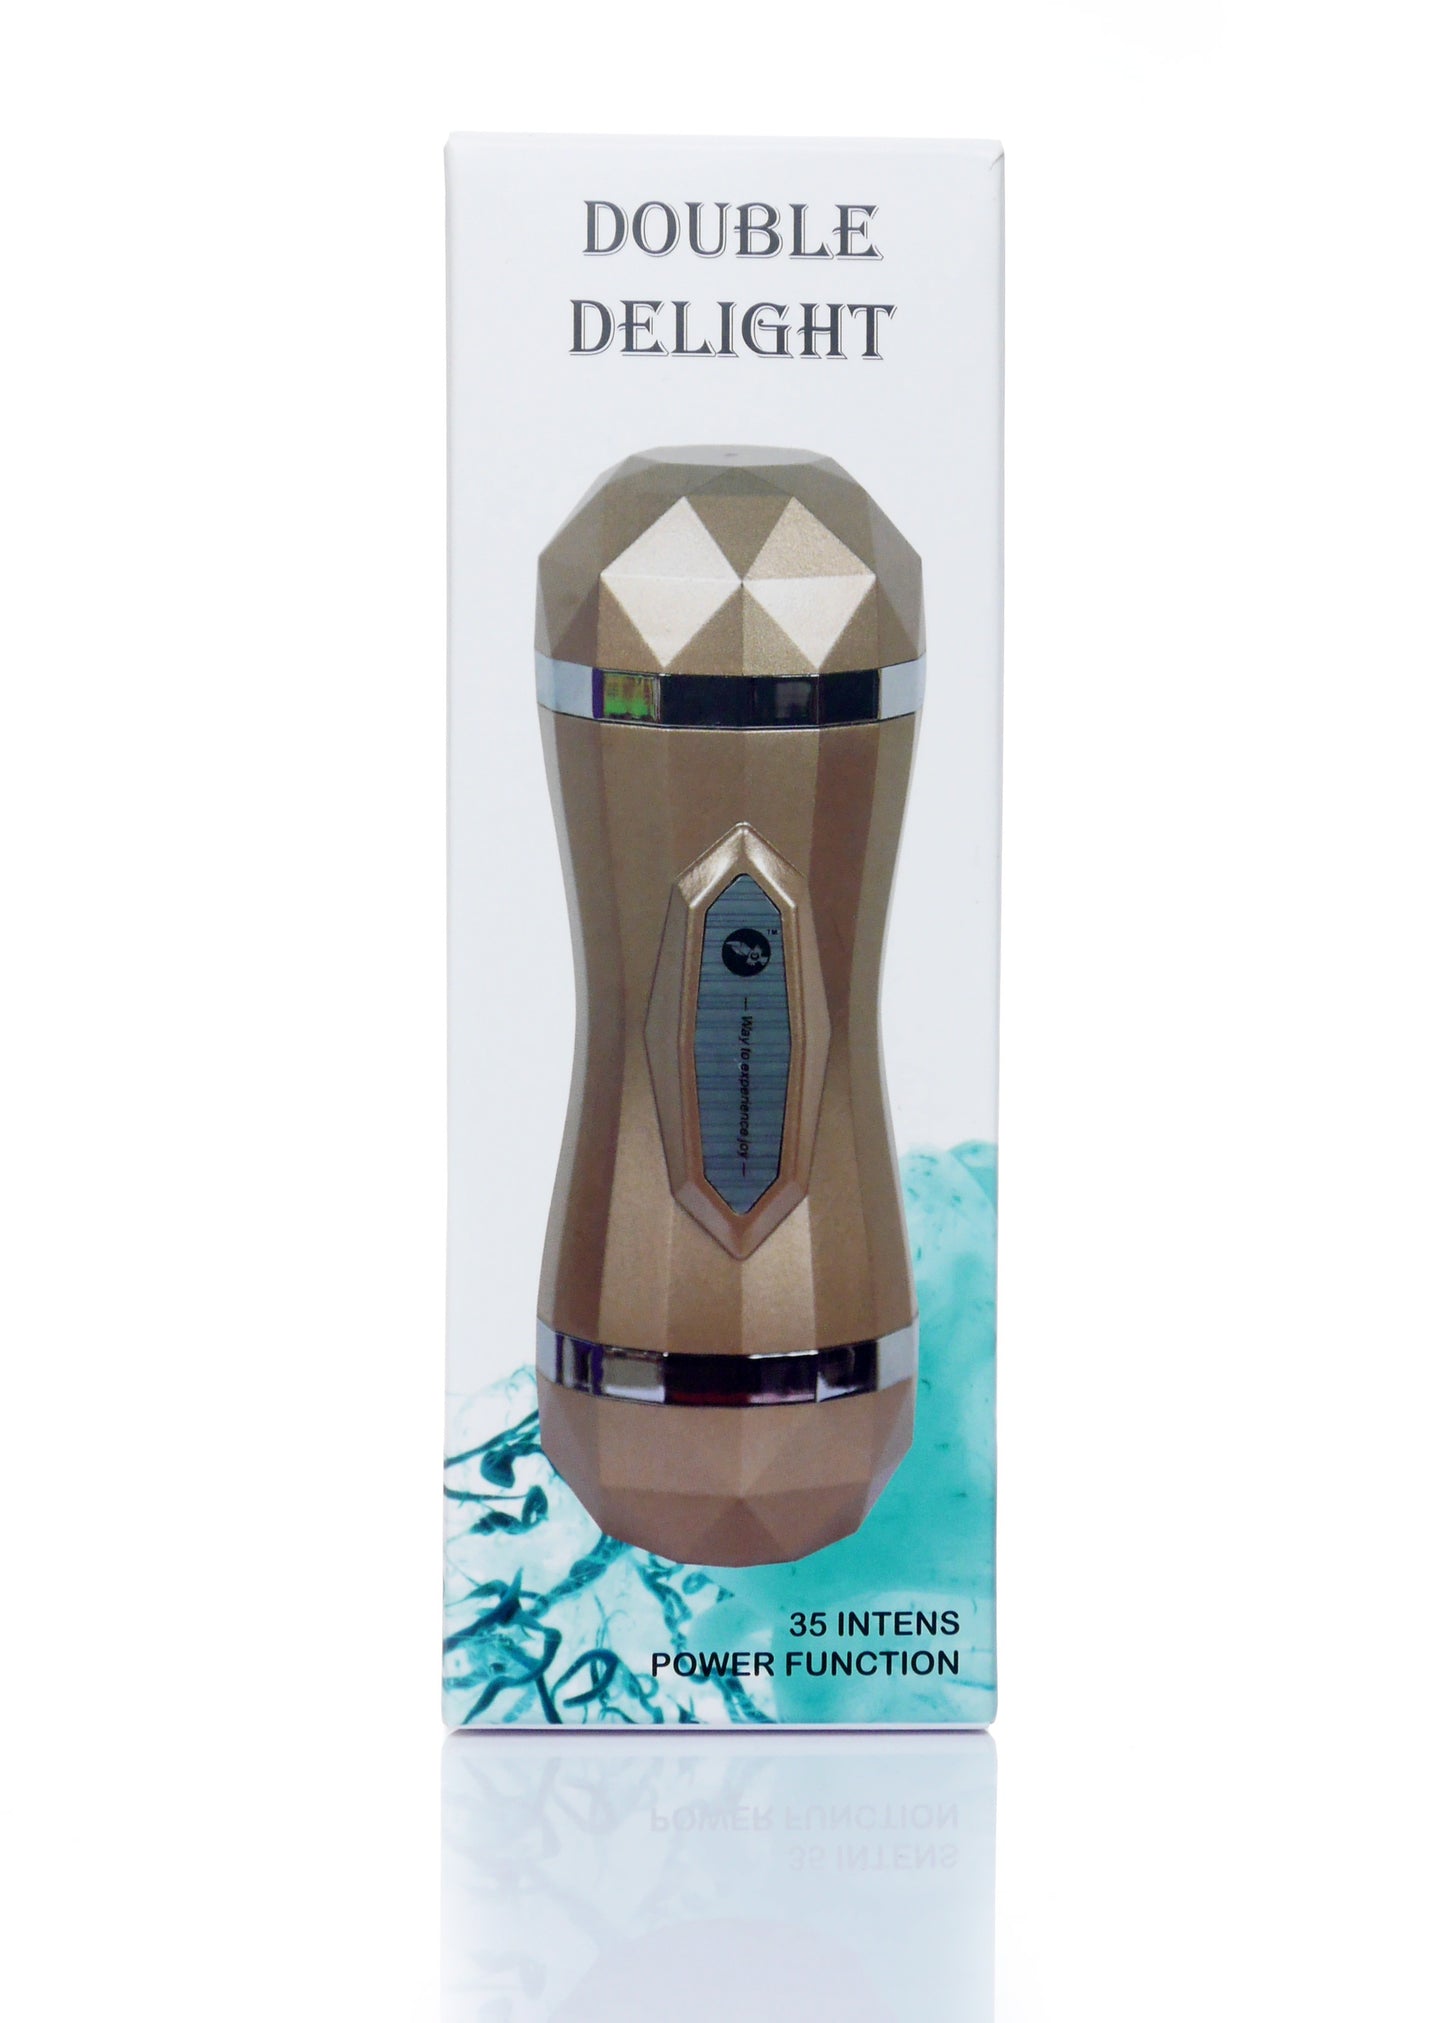 Bossoftoys - 26-00075 - Double delight - 35 function - usb rechargeable - heavy version - double holes